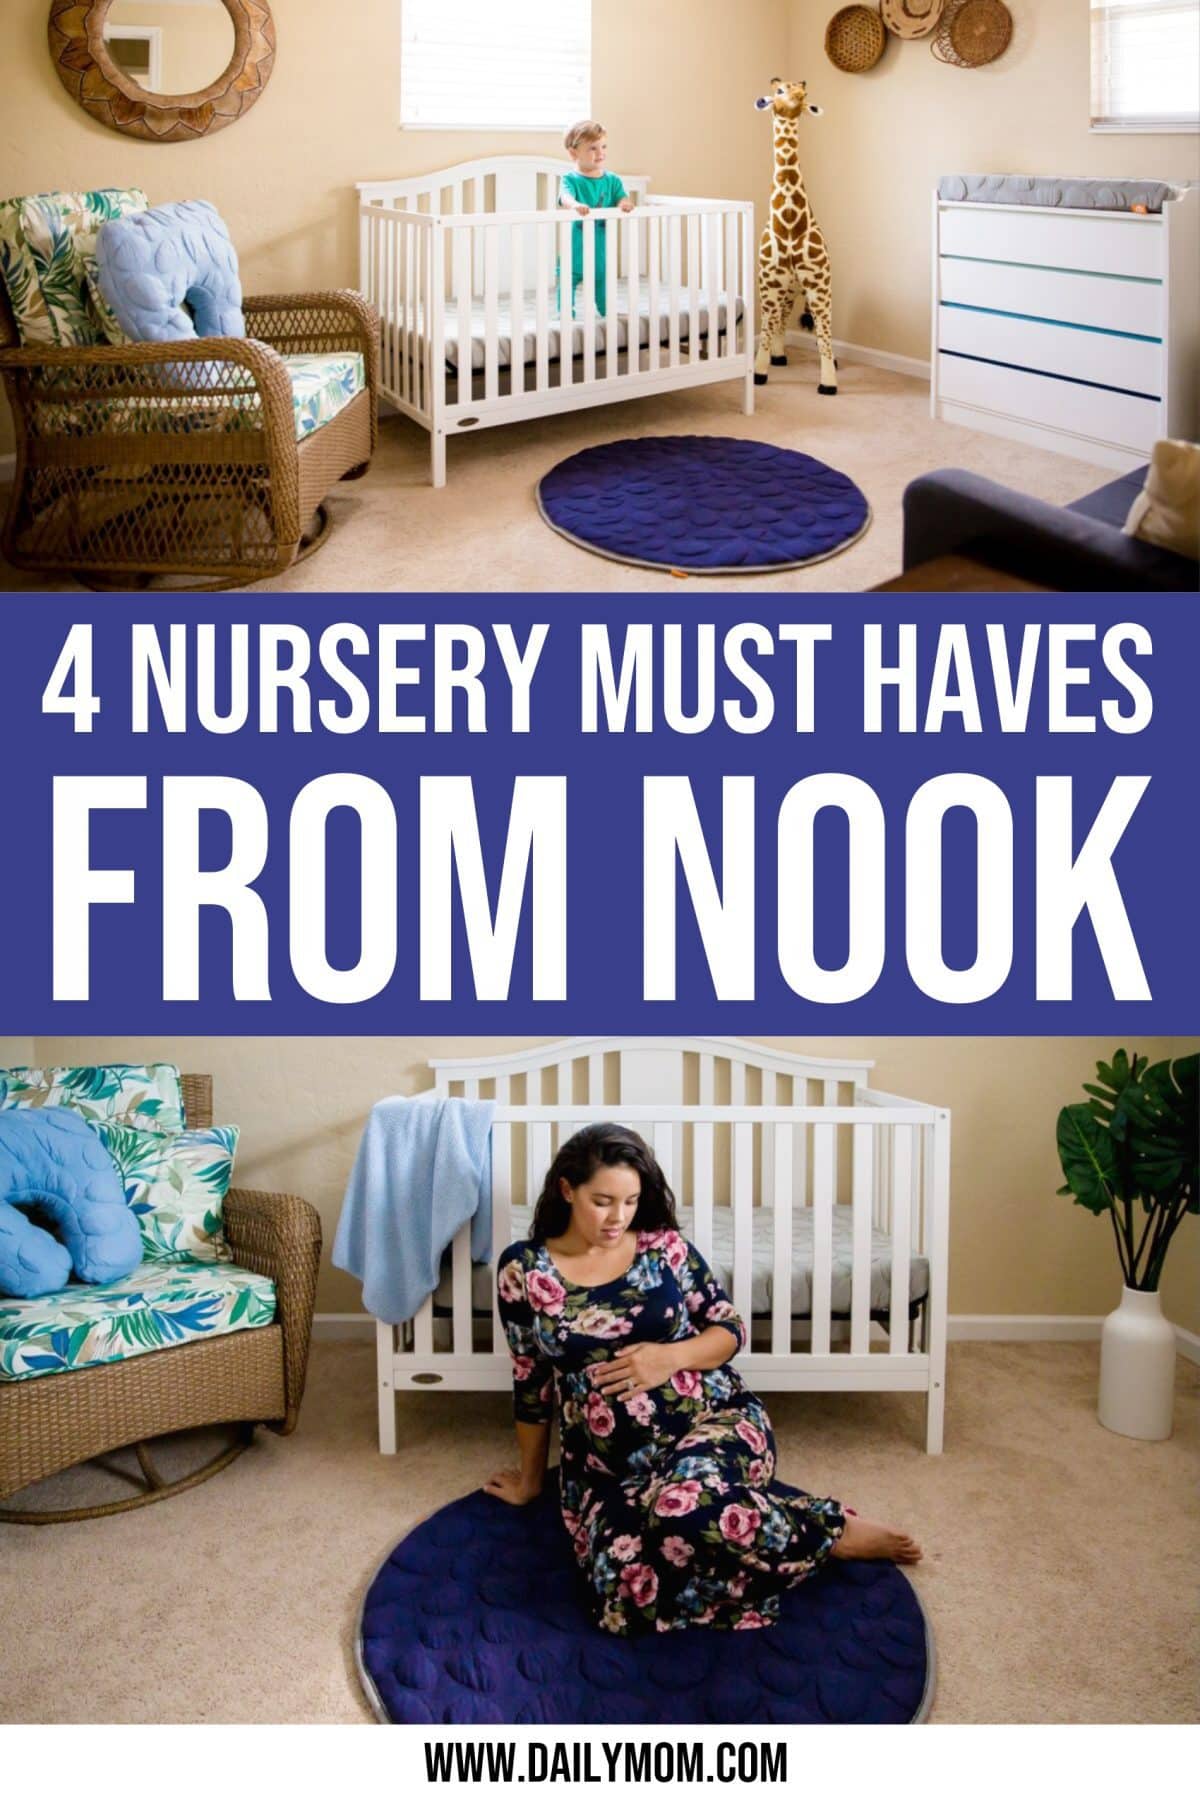 Why Nook Should Be Your One-stop Nursery Shop